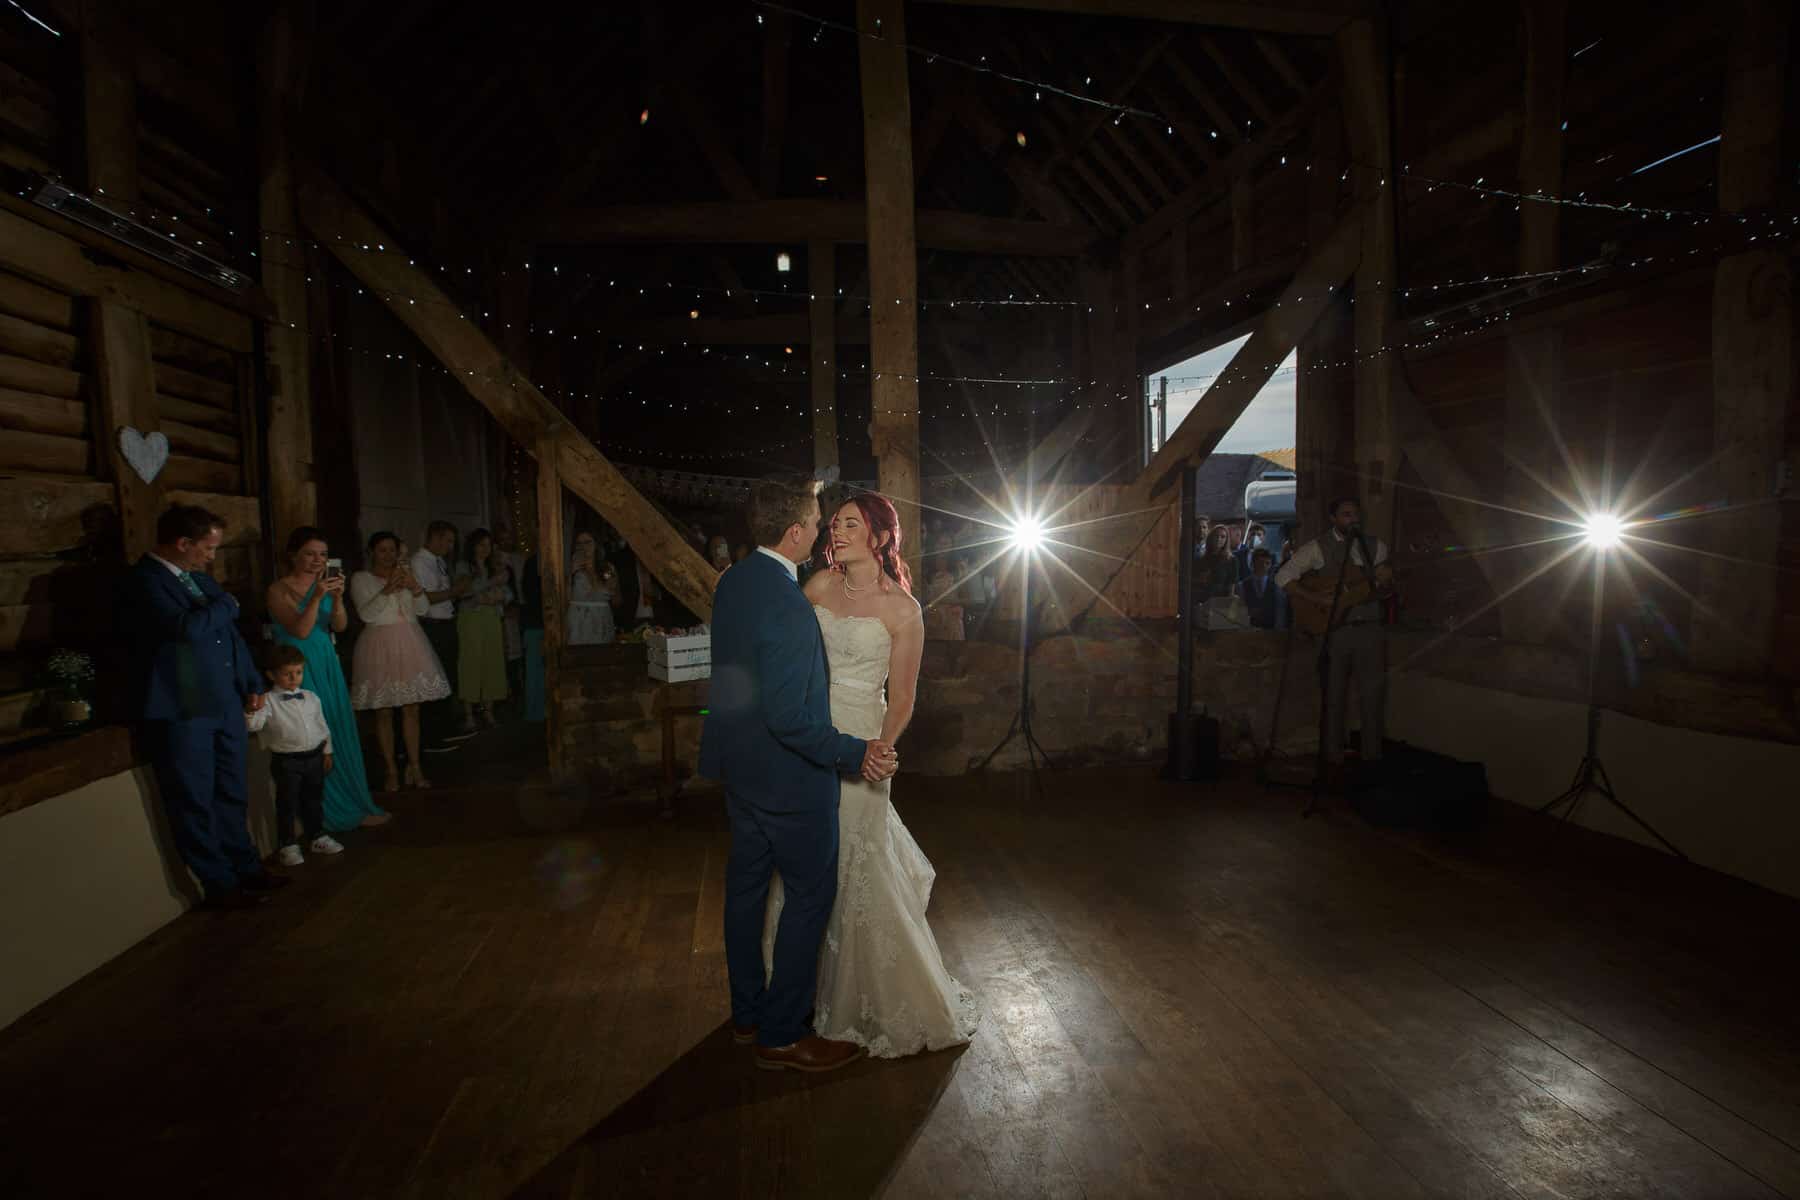 A bride and groom elegantly sway to the music in the rustic ambiance of Pimhill Barn, creating a picture-perfect Shropshire wedding.